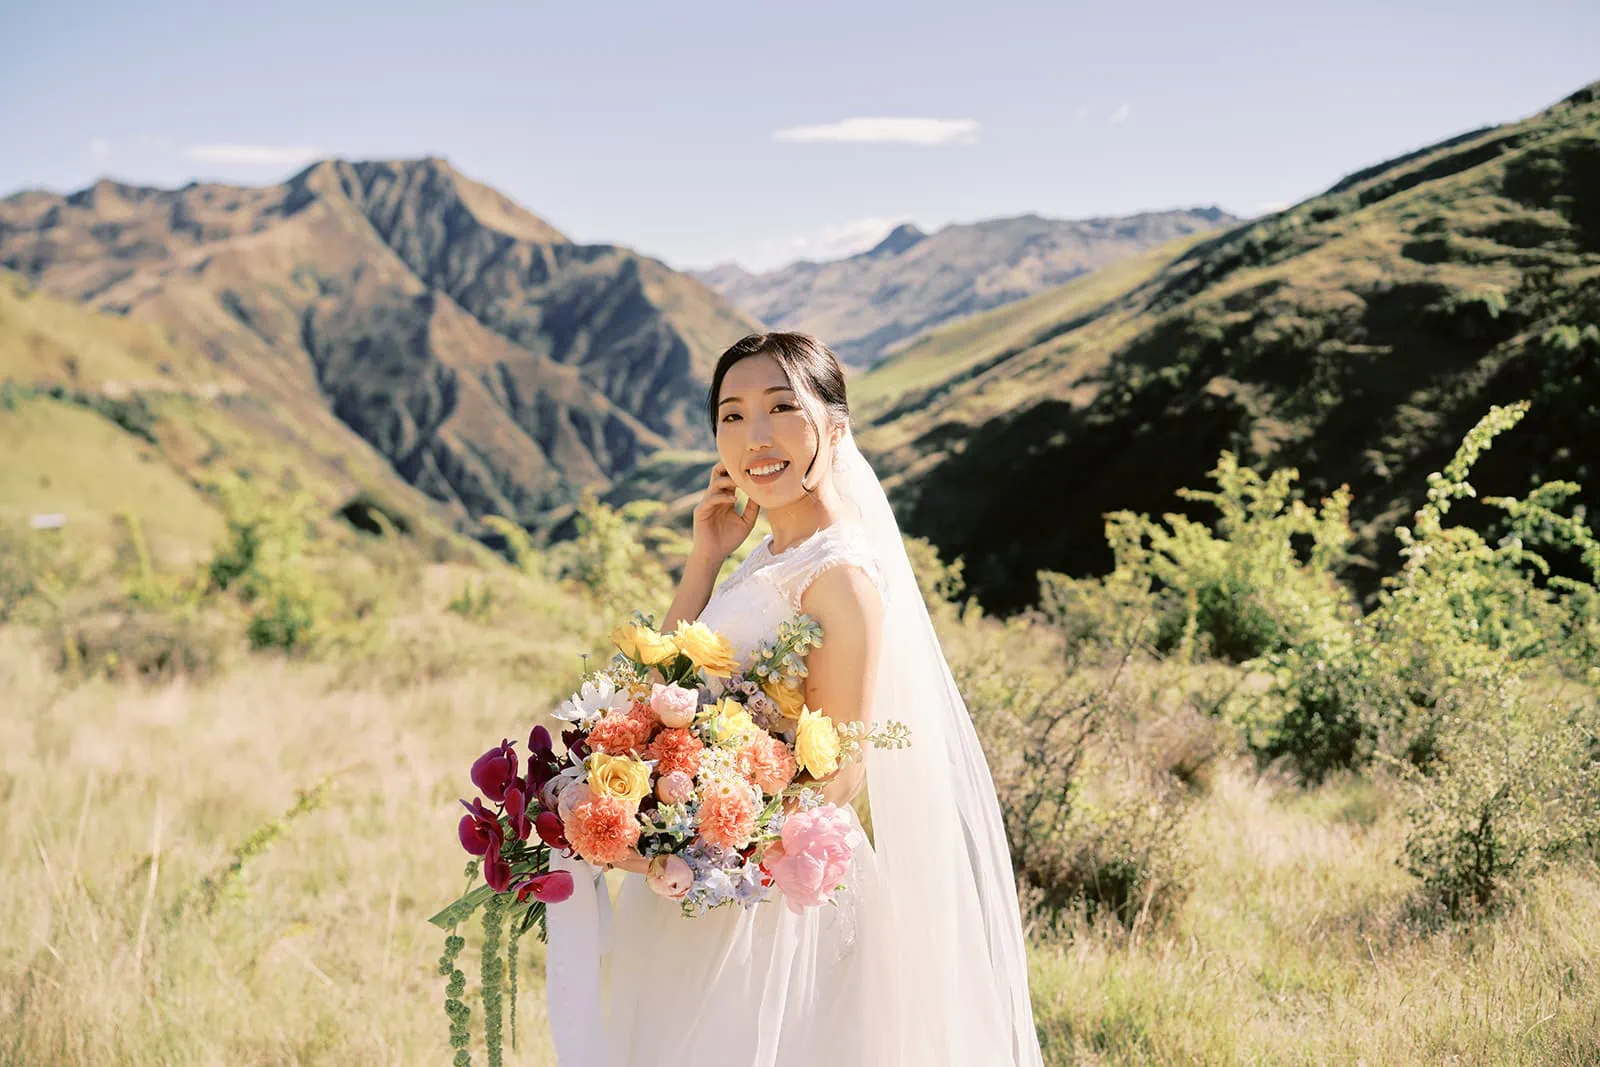 Queenstown Elopement Heli Wedding Photographer クイーンズタウン結婚式 | Saki & Taisei having a pre-wedding photoshoot in Queenstown Heli, with the bride holding a bouquet in a field and mountains in the background.